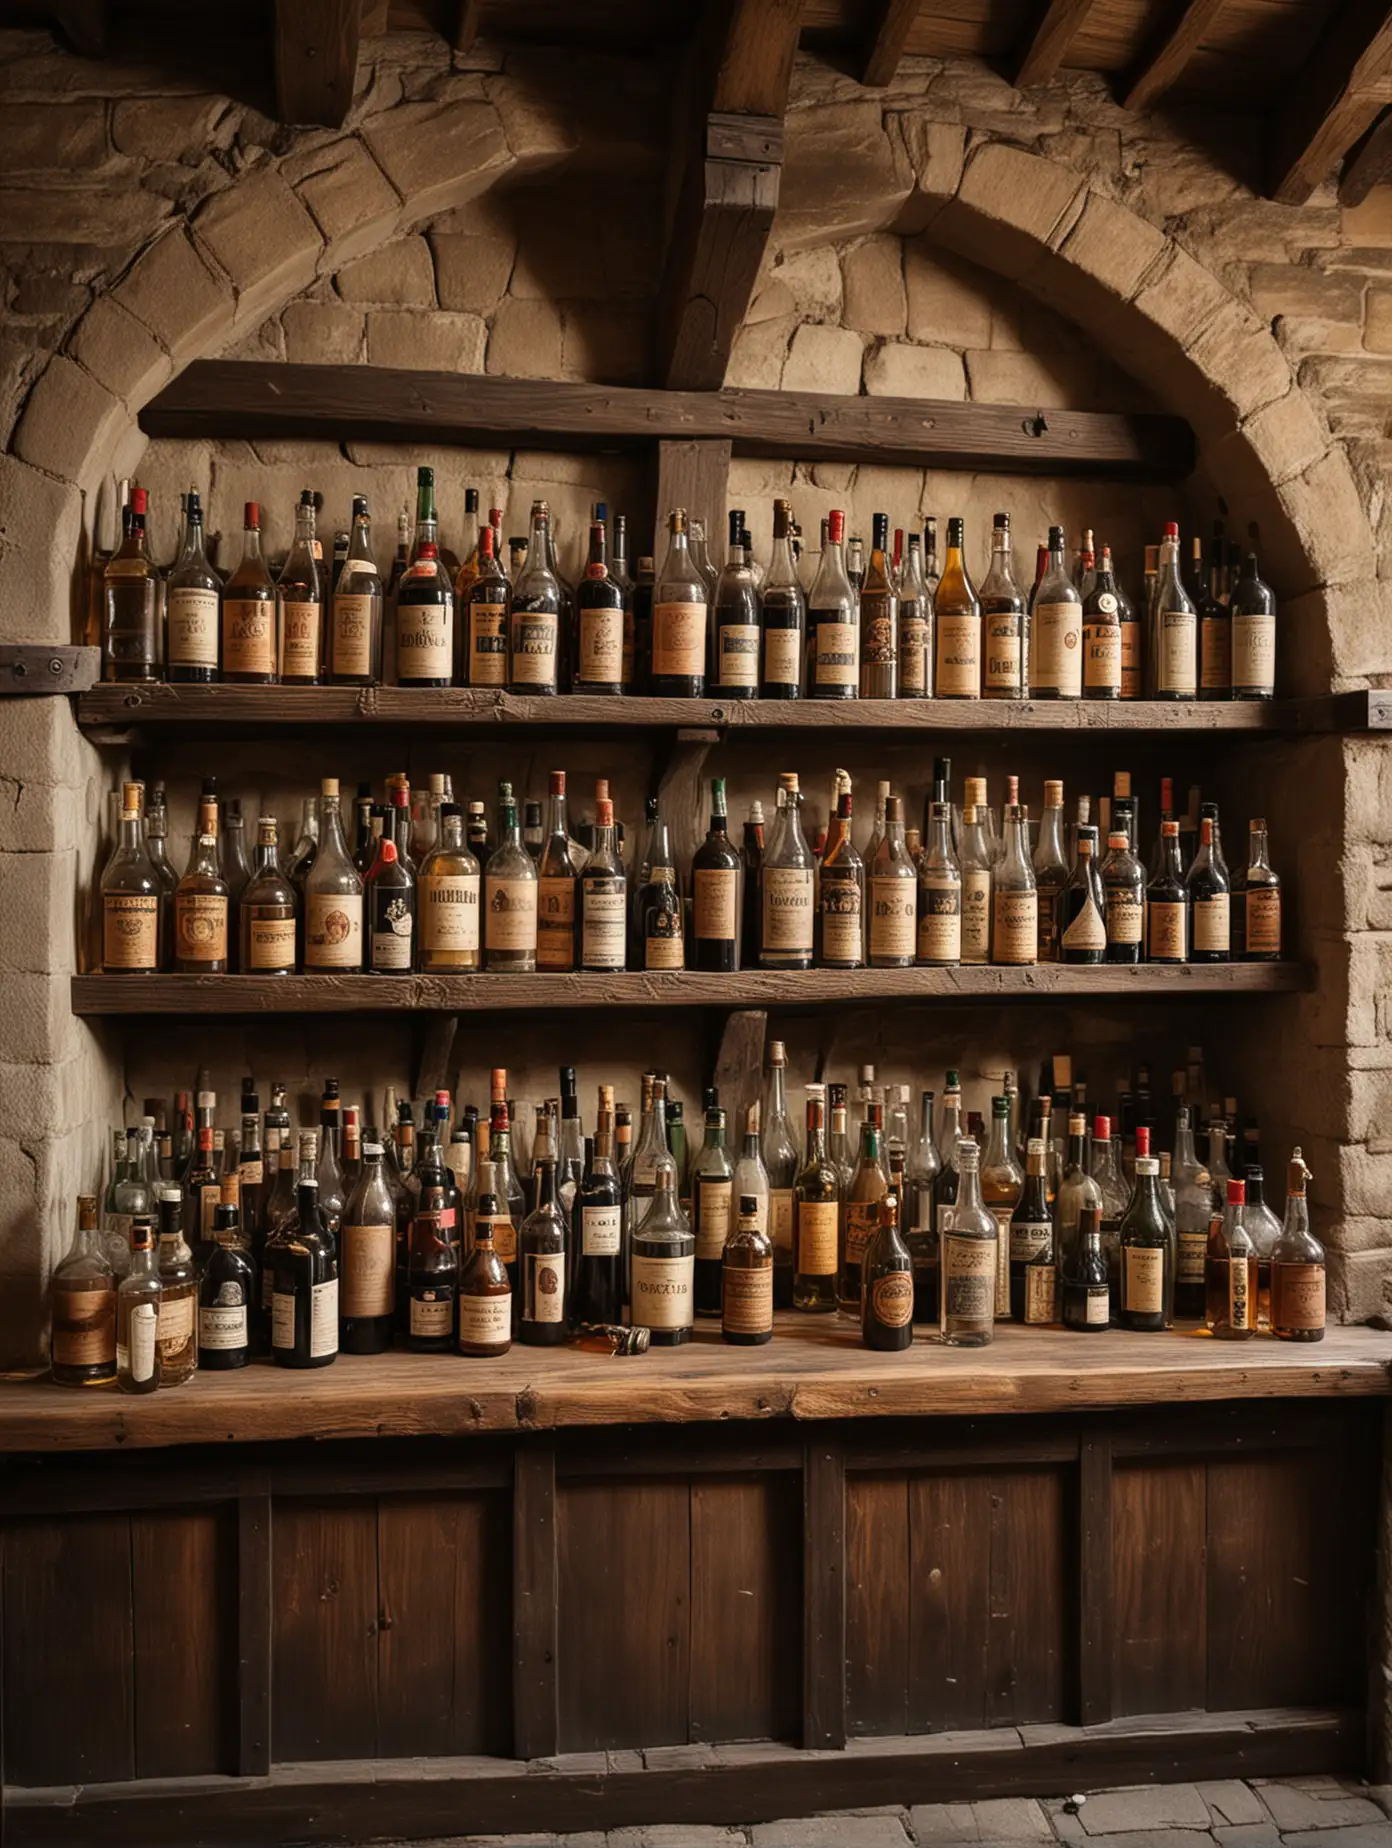 Medieval Bar with Bottles of Liquor